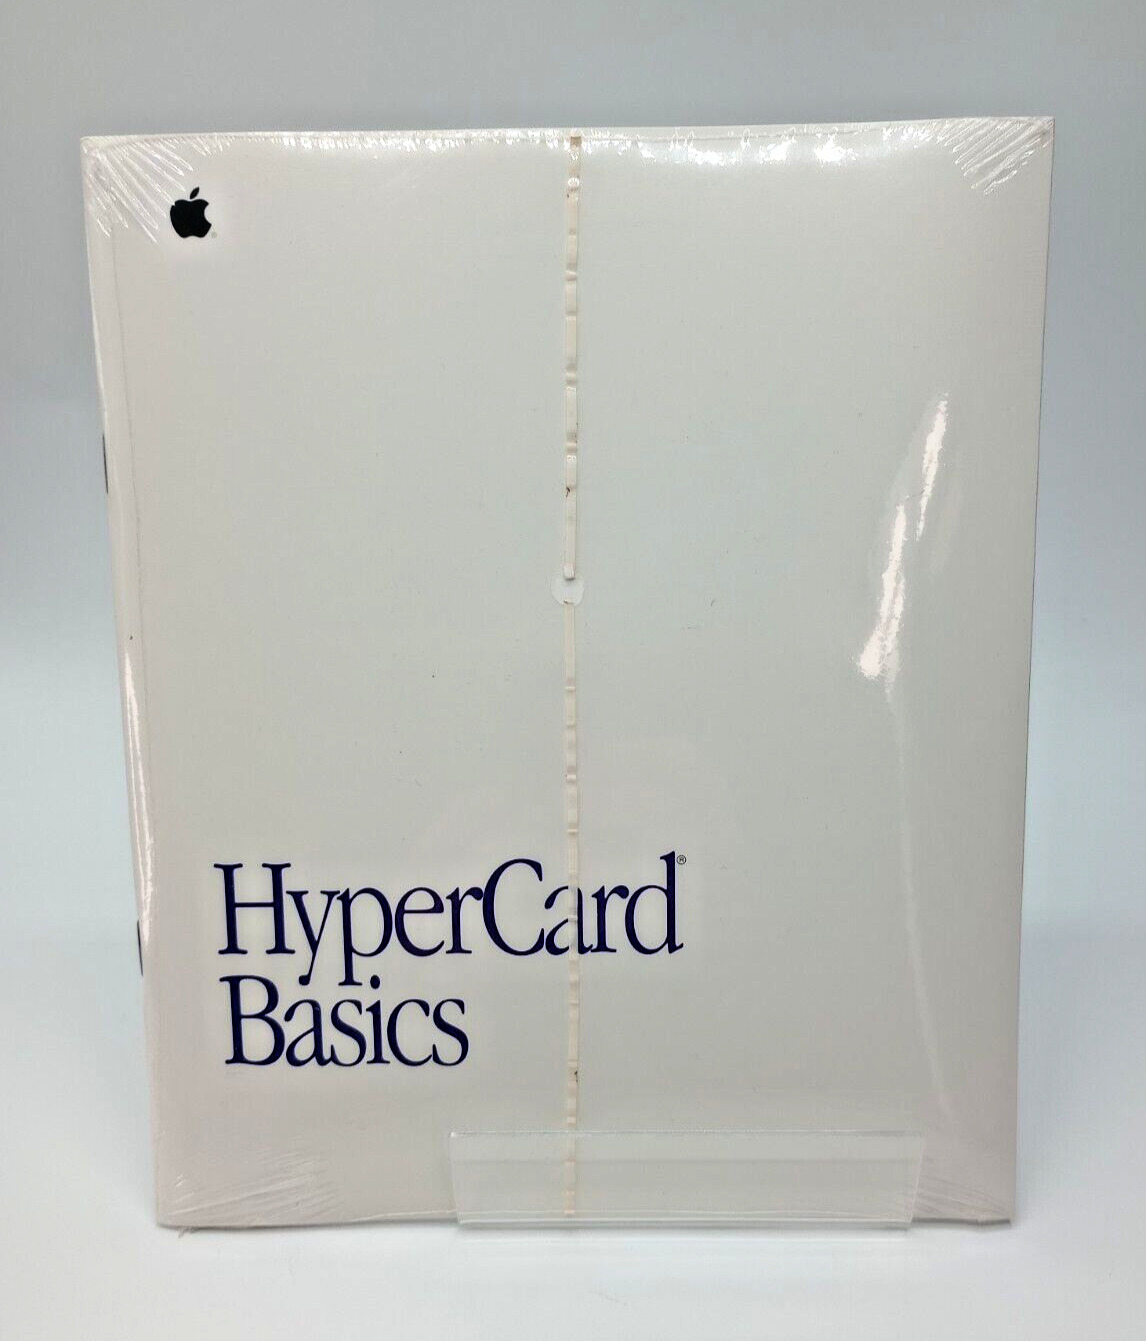 NEW/SEALED Apple Macintosh HyperCard Basics User’s Manual with Disk